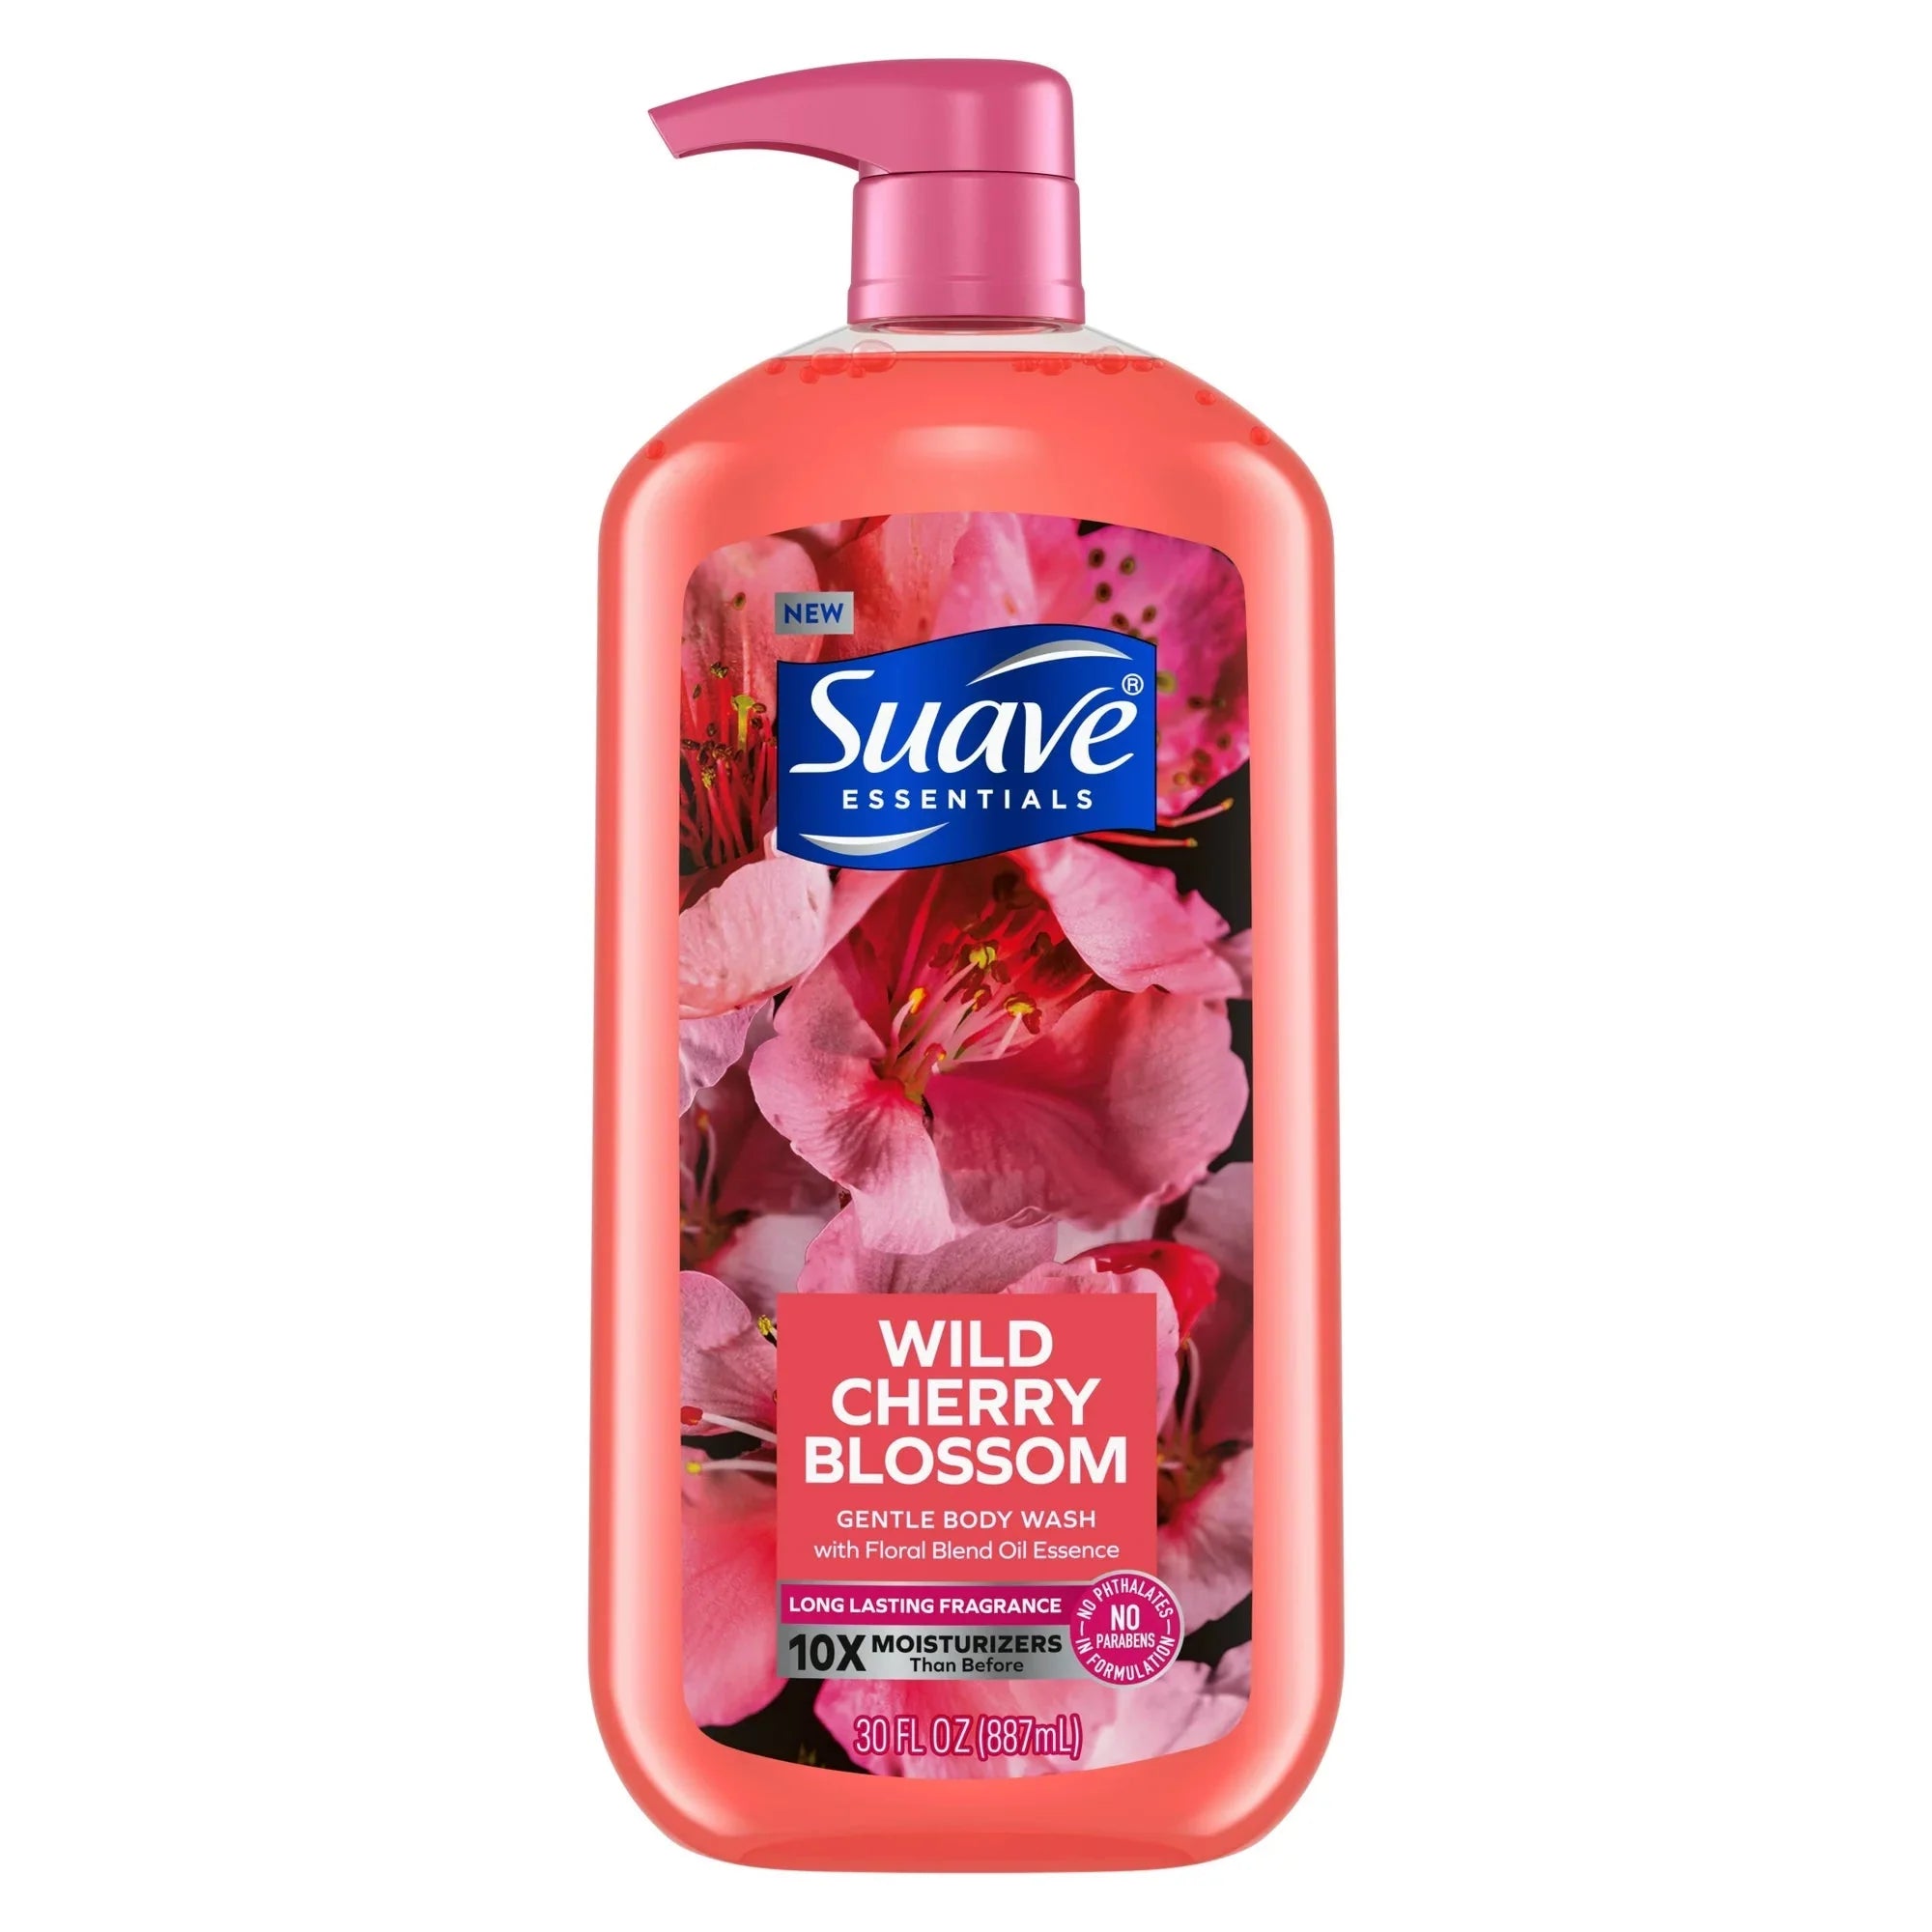 Wholesale prices with free shipping all over United States Suave Essentials Gentle Liquid Body Wash, Wild Cherry Blossom, 30 oz - Steven Deals